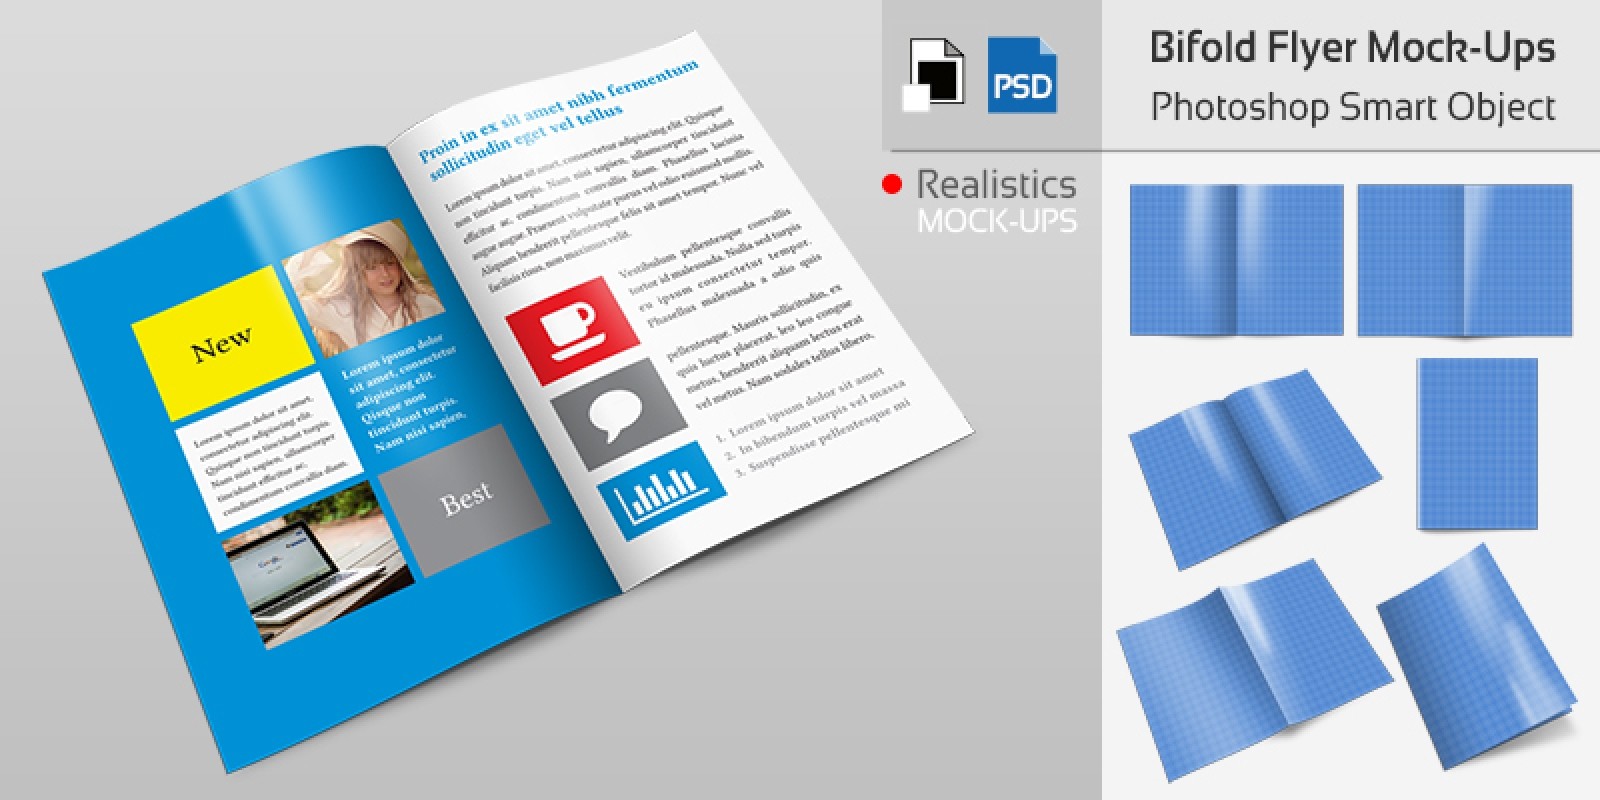 Download Bifold Flyer Mockup Templates Vol 001 by Ones212 | Codester